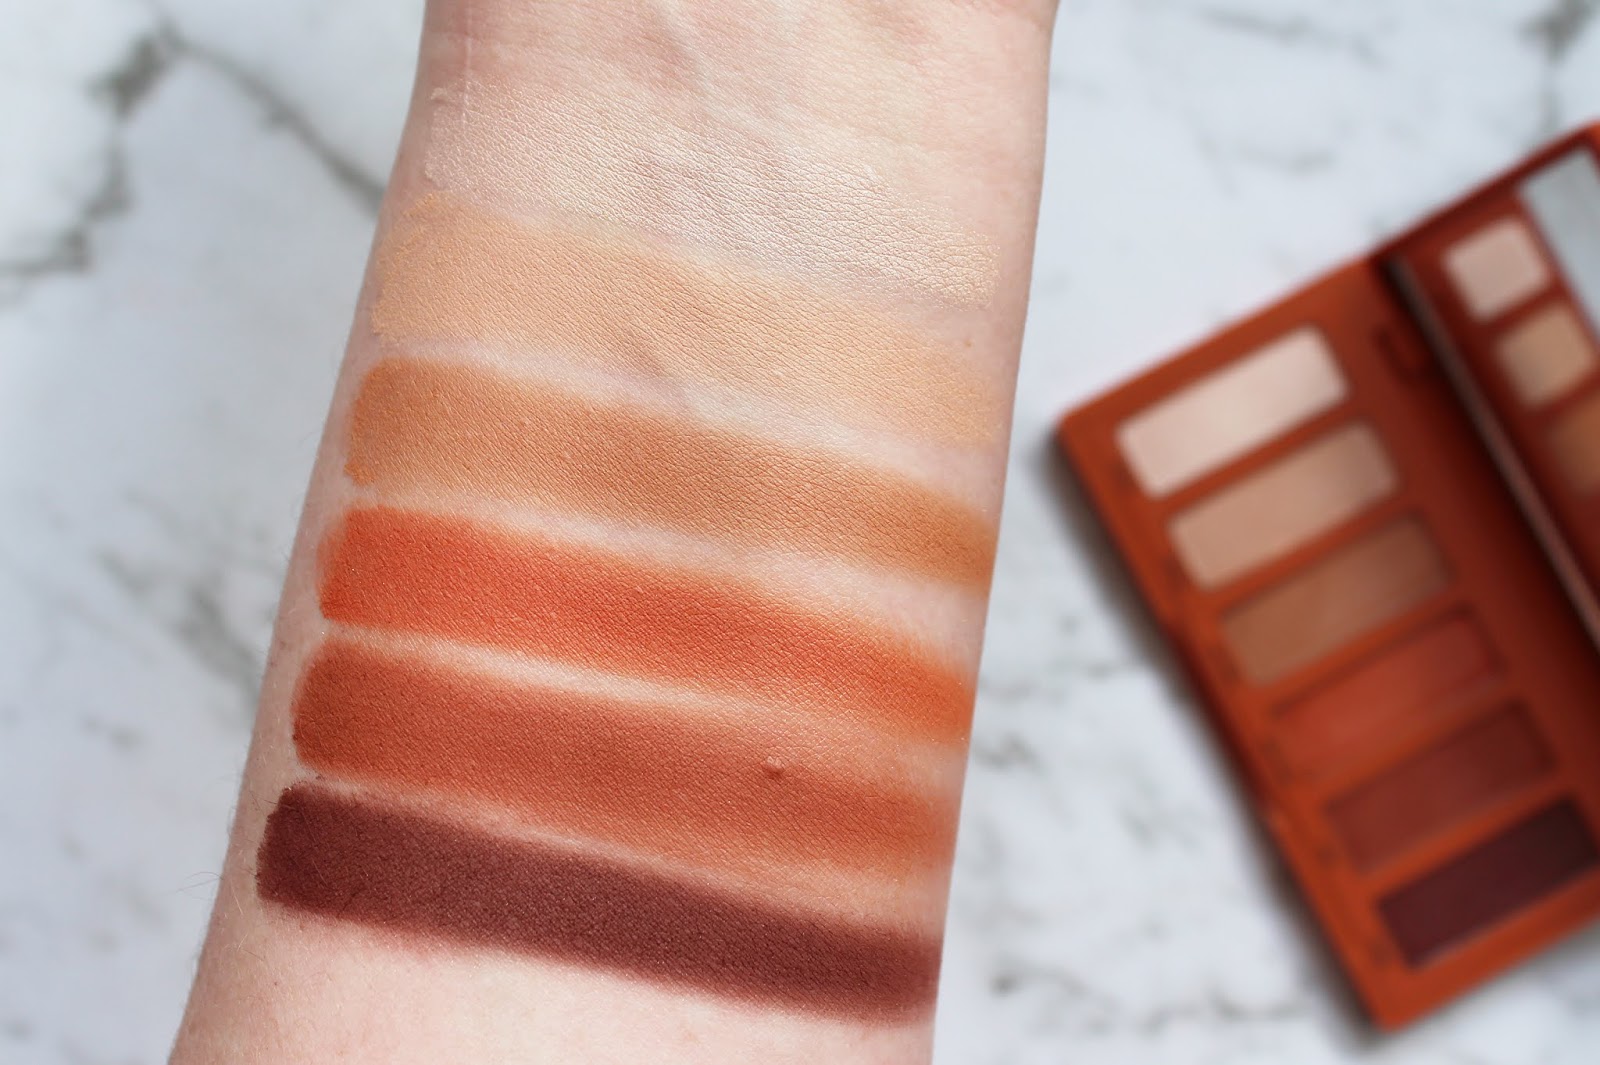 URBAN DECAY | Naked Petite Heat Palette - Review + Swatches - CassandraMyee